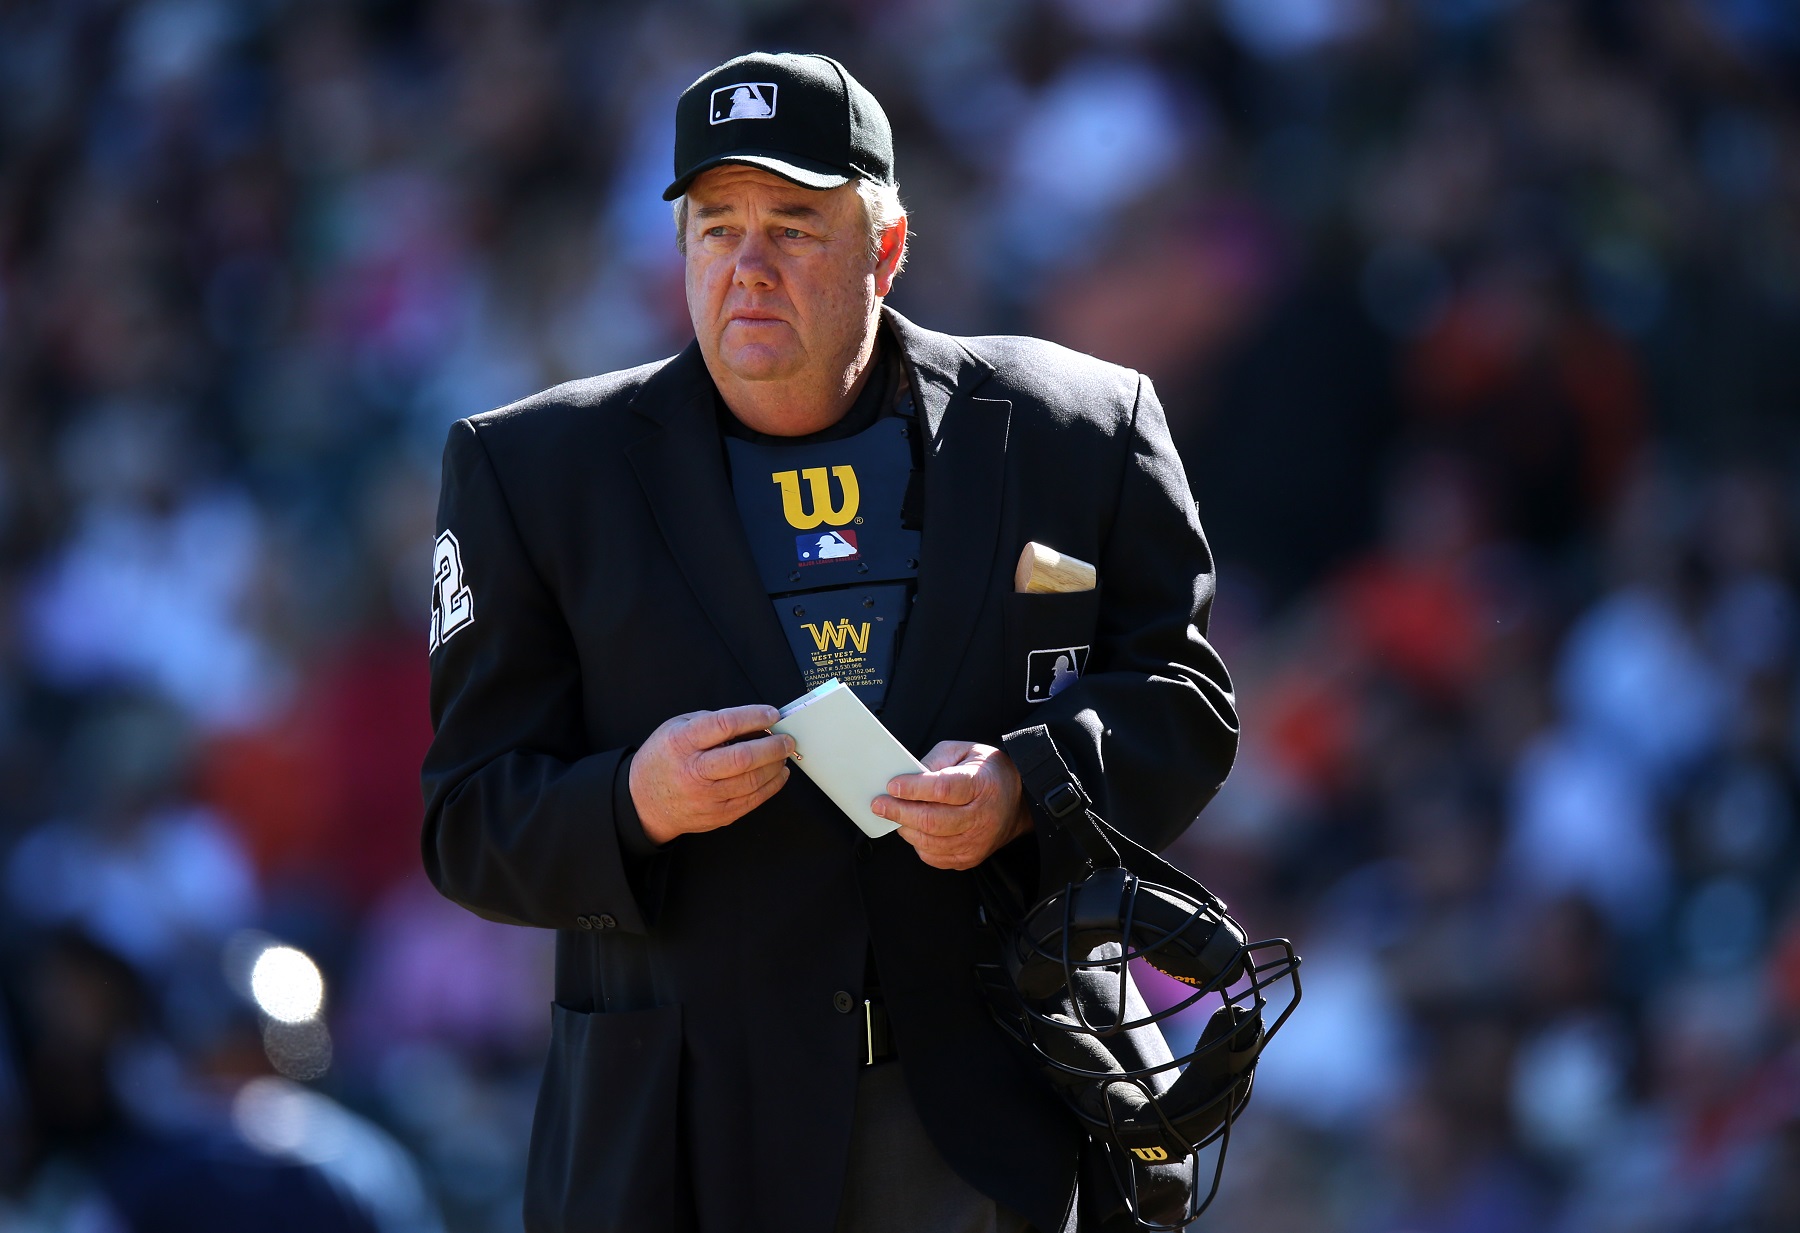 Joe West Lets Slip That He’s a Donald Trump Supporter While Ejecting a GM